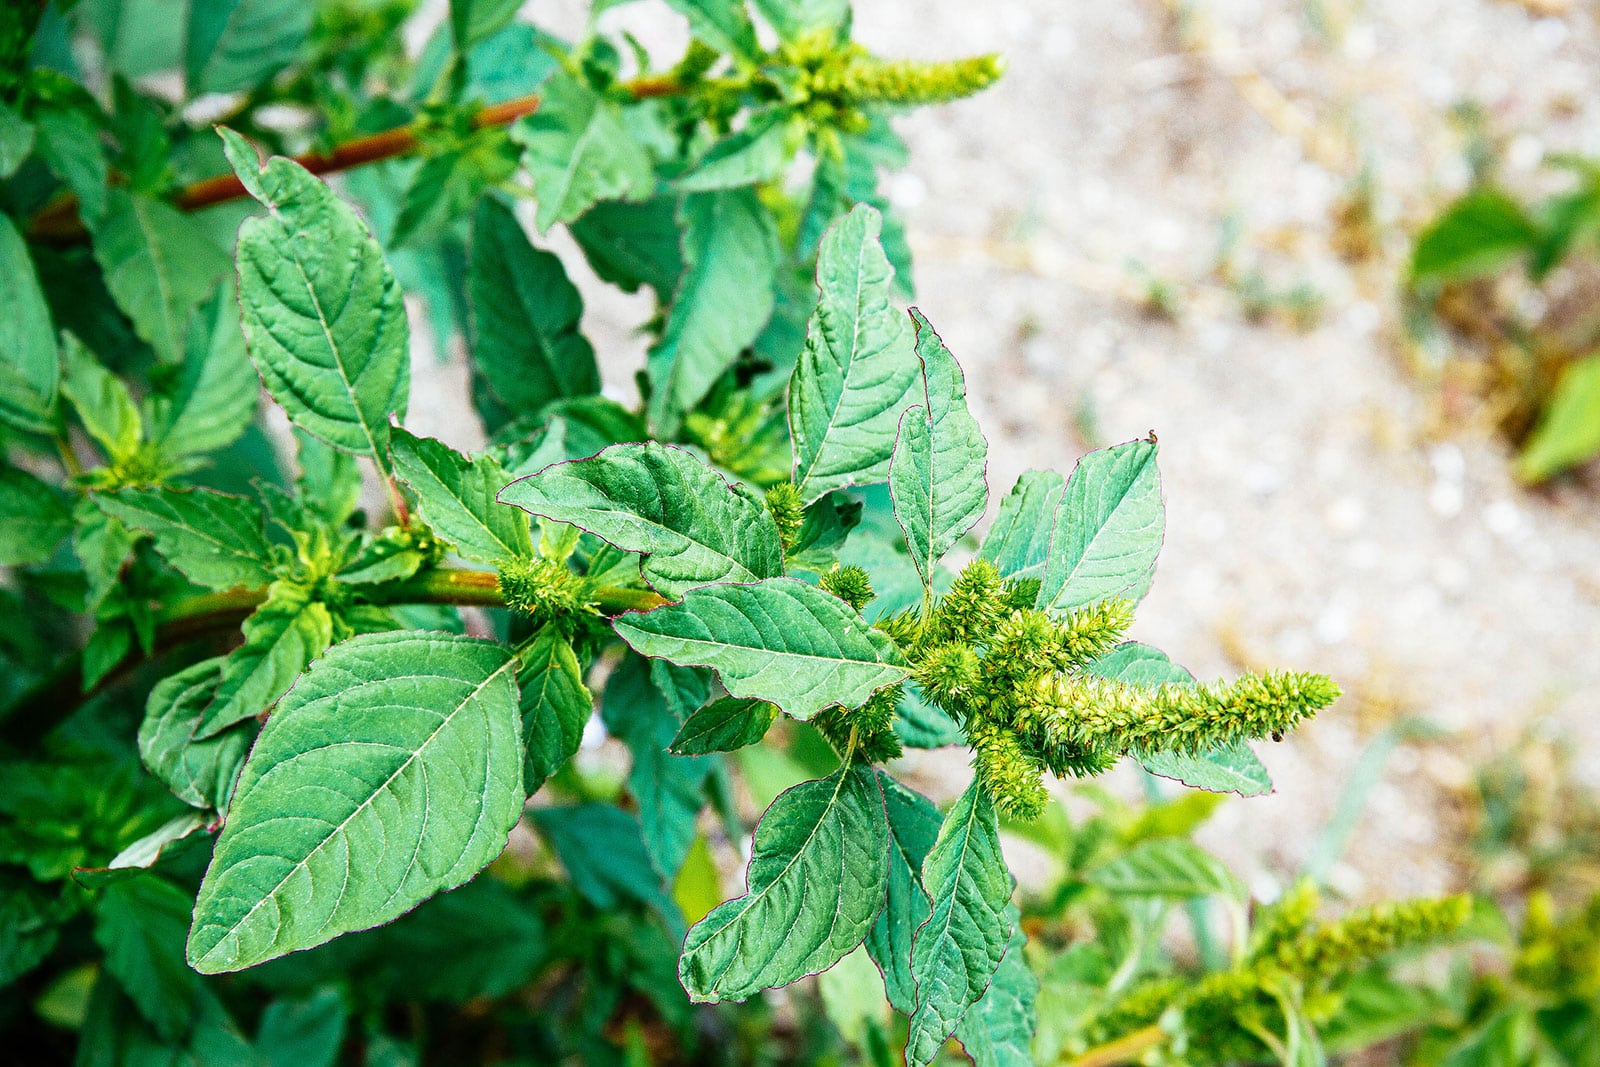 Pigweed amaranth plant with flower spikes